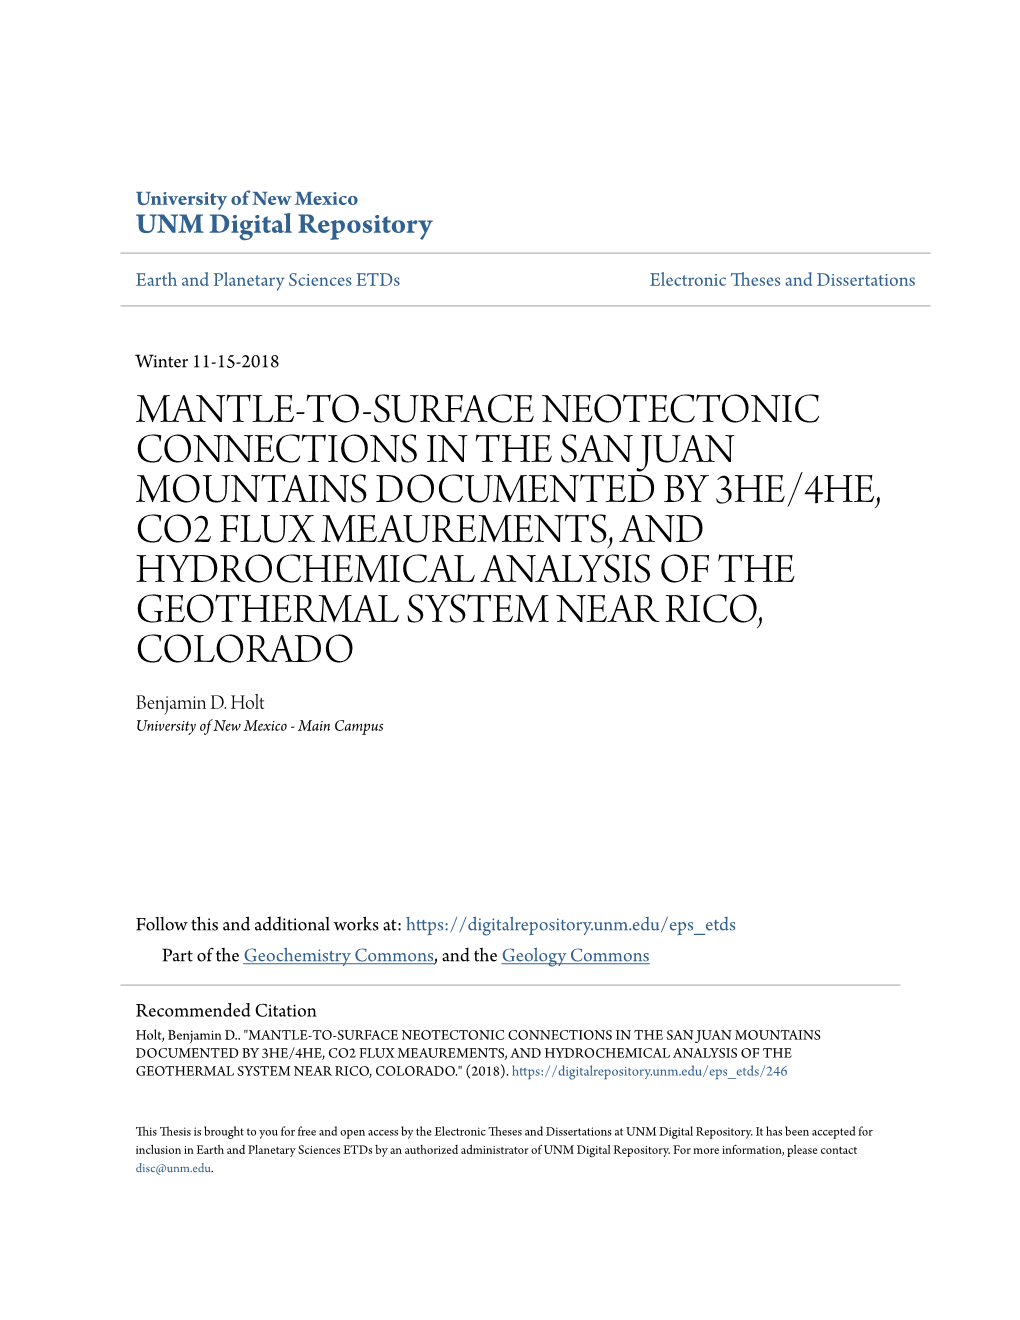 Mantle-To-Surface Neotectonic Connections in the San Juan Mountains Documented by 3He/4He, Co2 Flux